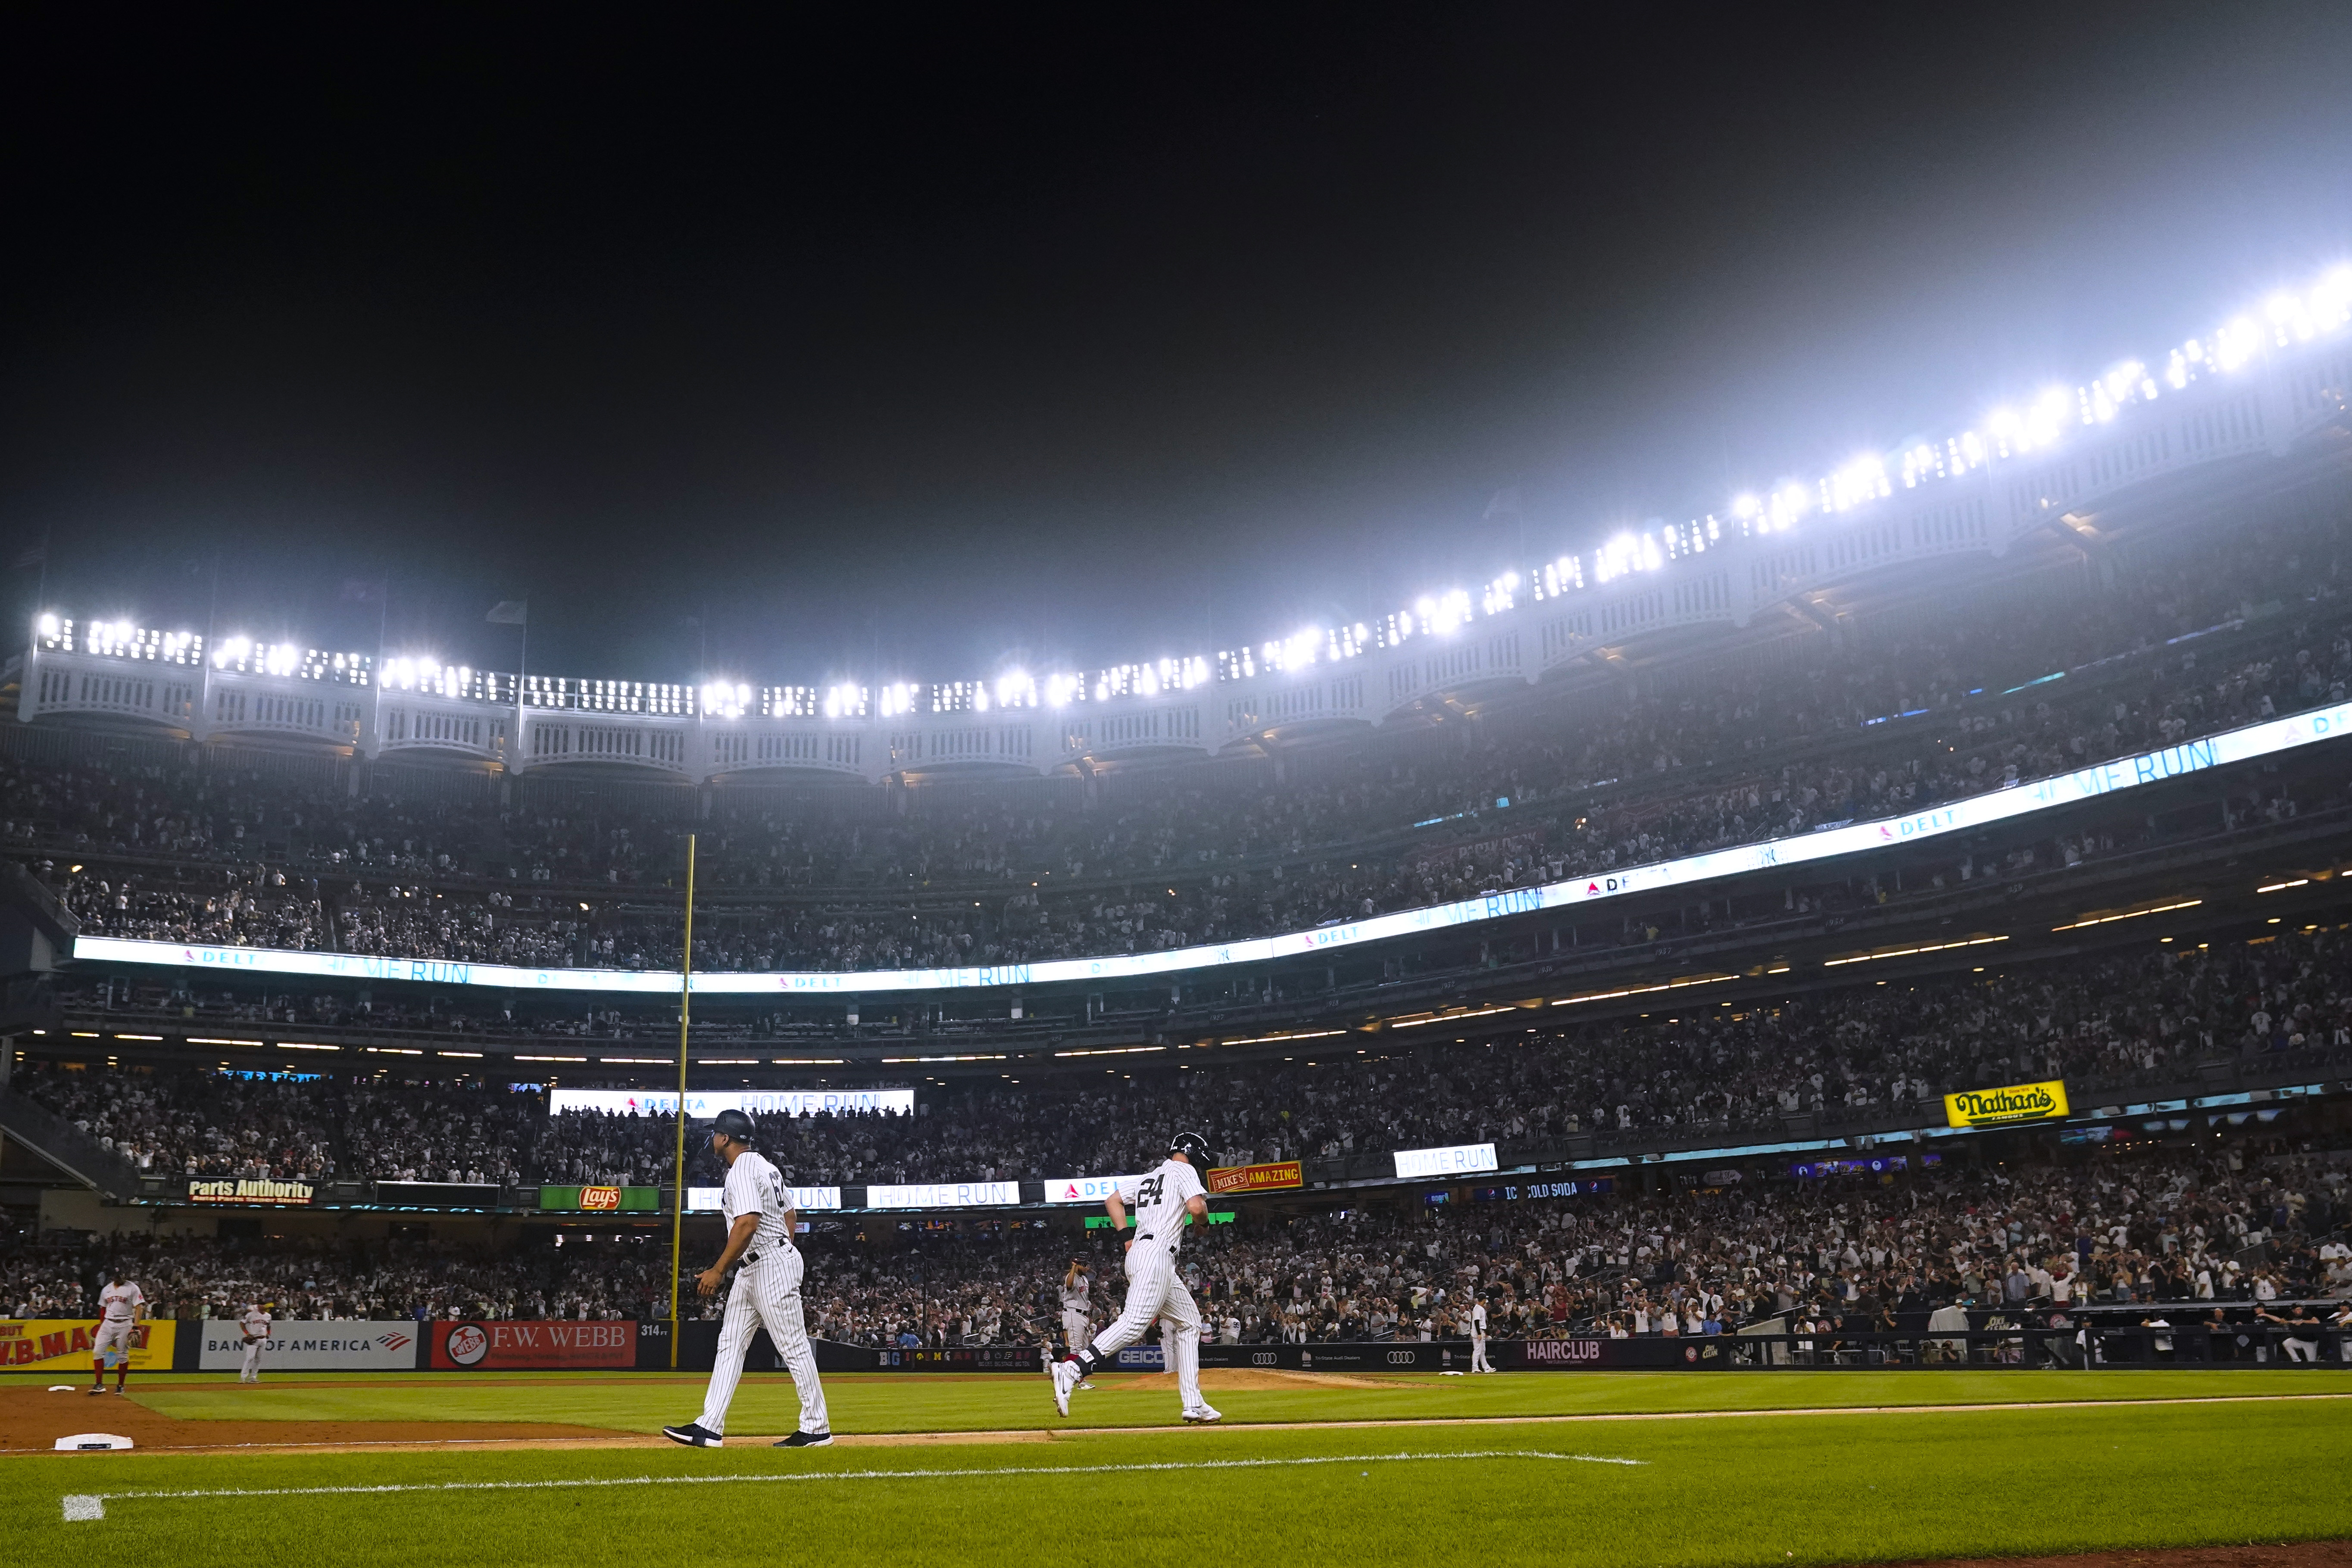 Unexplainable 'flashing' light disrupts Yankees-Red Sox game